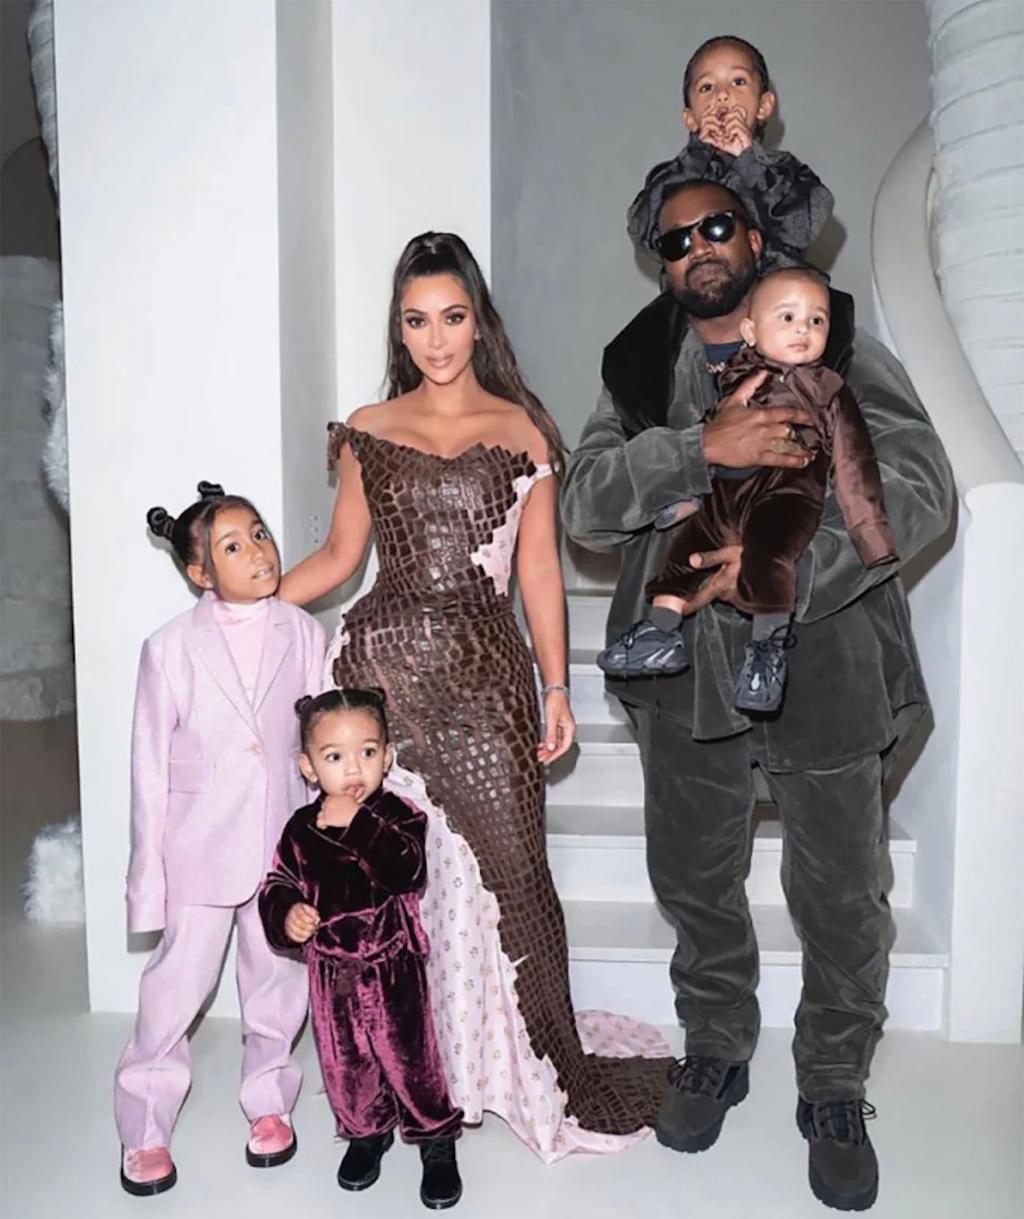 Kanye Wests Songtext zu Angry Babies